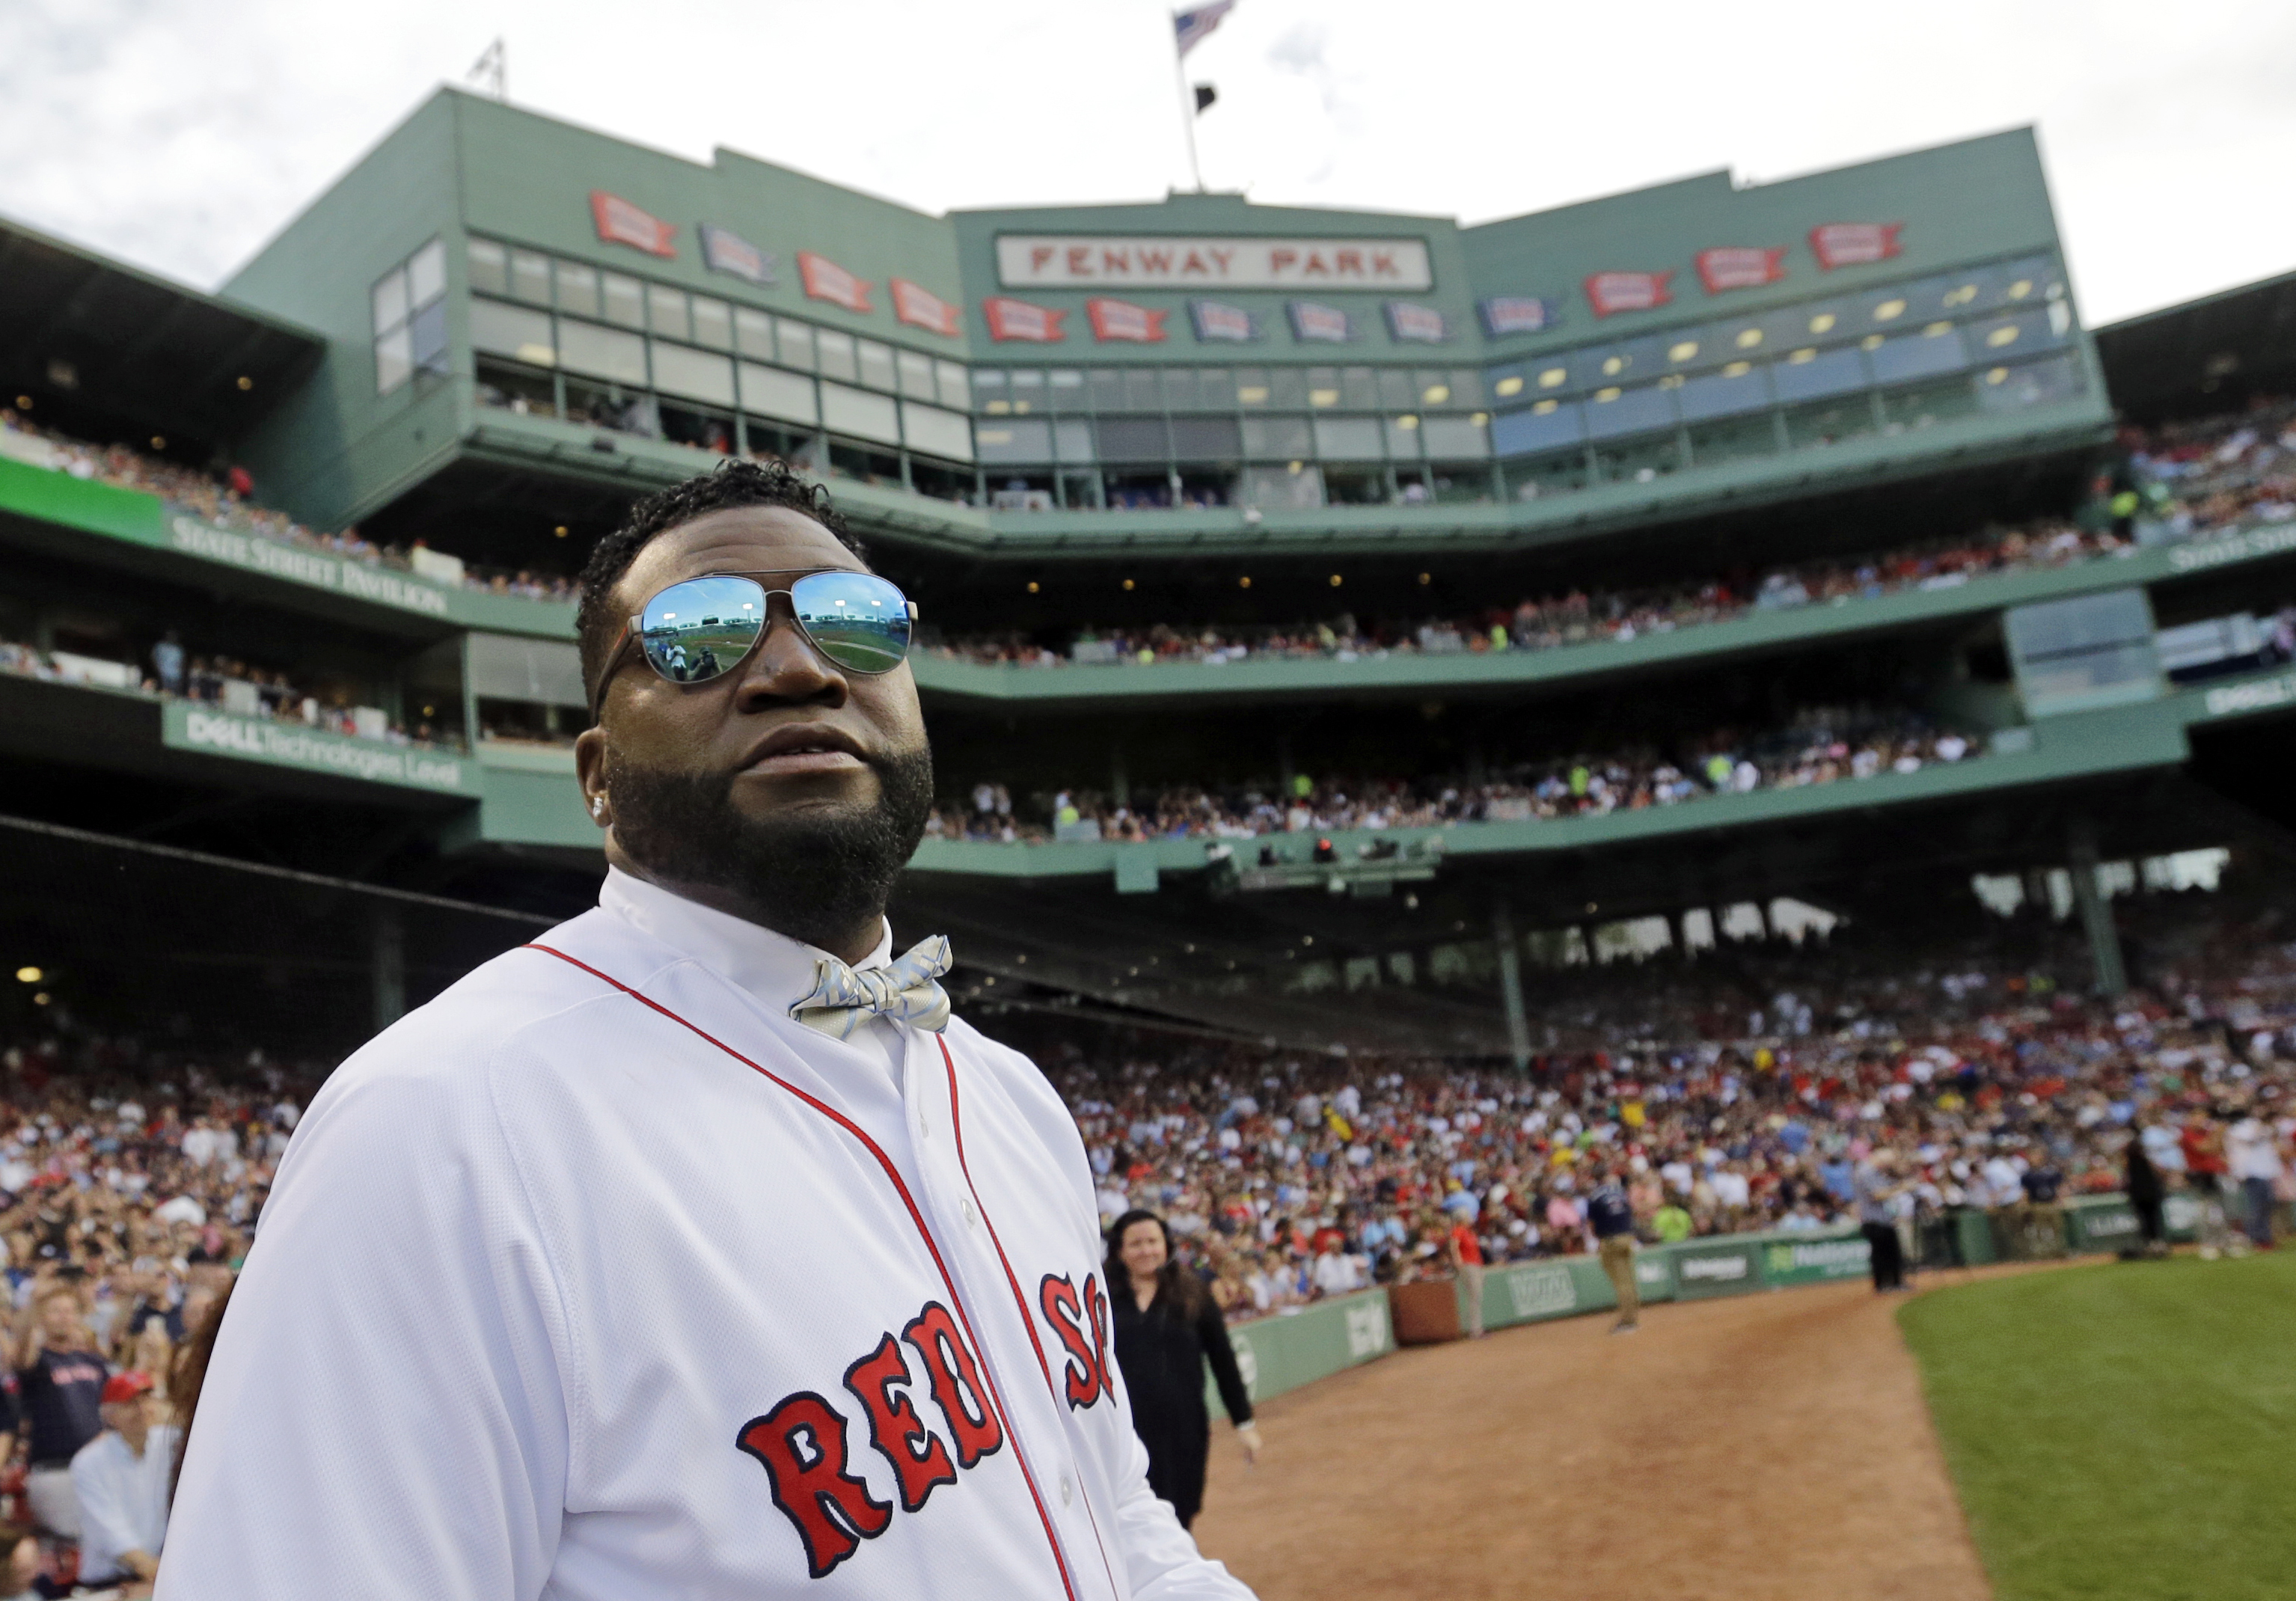 Video: Red Sox great David Ortiz gets into Baseball Hall of Fame